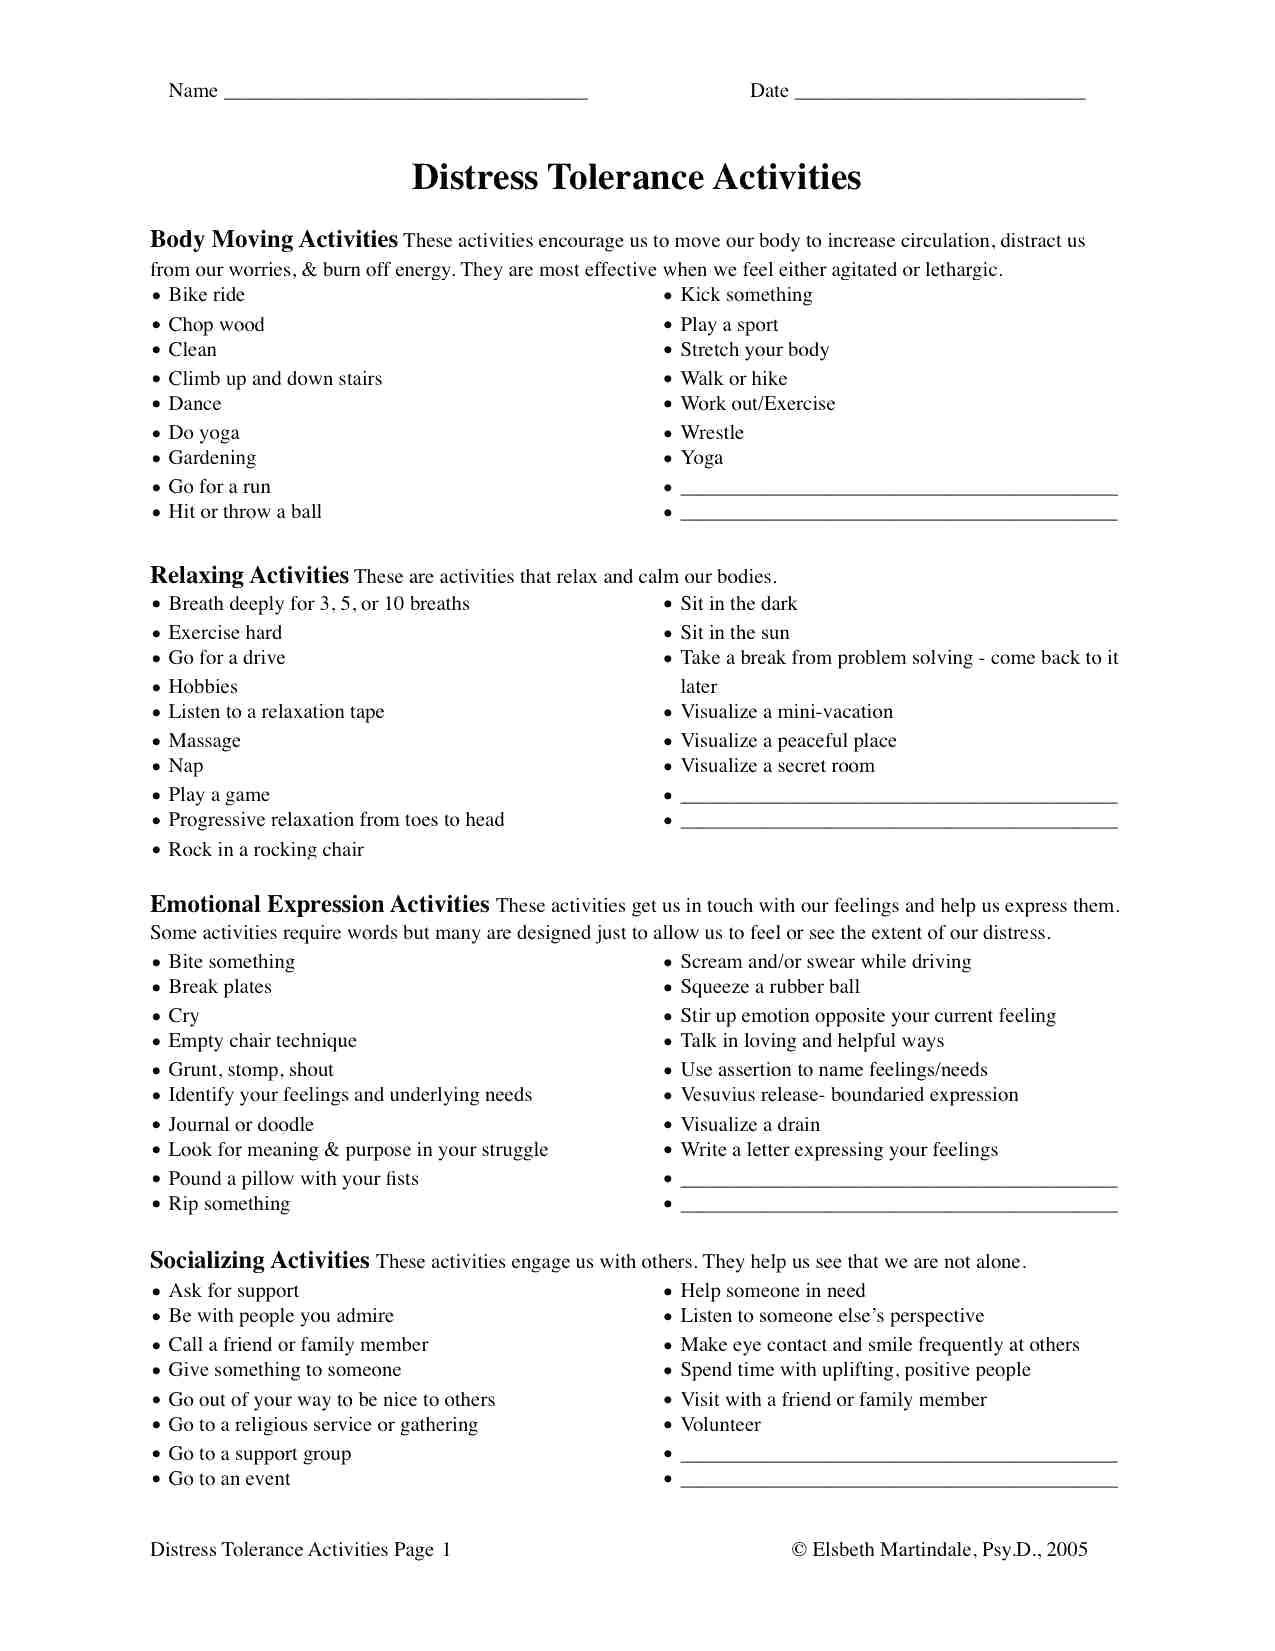 Life Skills Worksheets For Adults The Best Worksheets Image